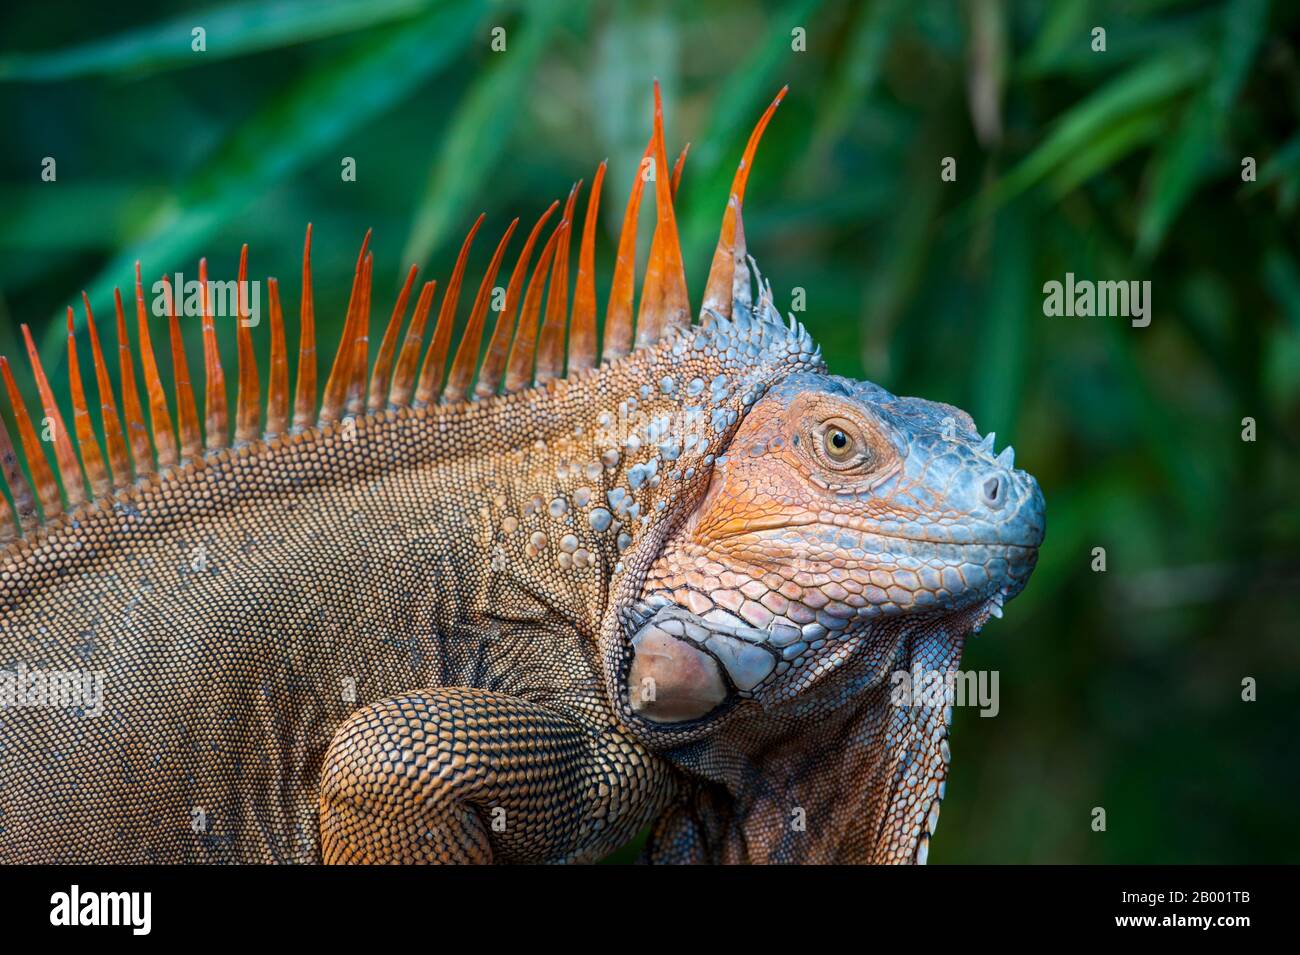 Portrait of a male Green iguana (Iguana iguana) with colorful breeding colors in the rainforest near the Arenal Volcano in Costa Rica. Stock Photo